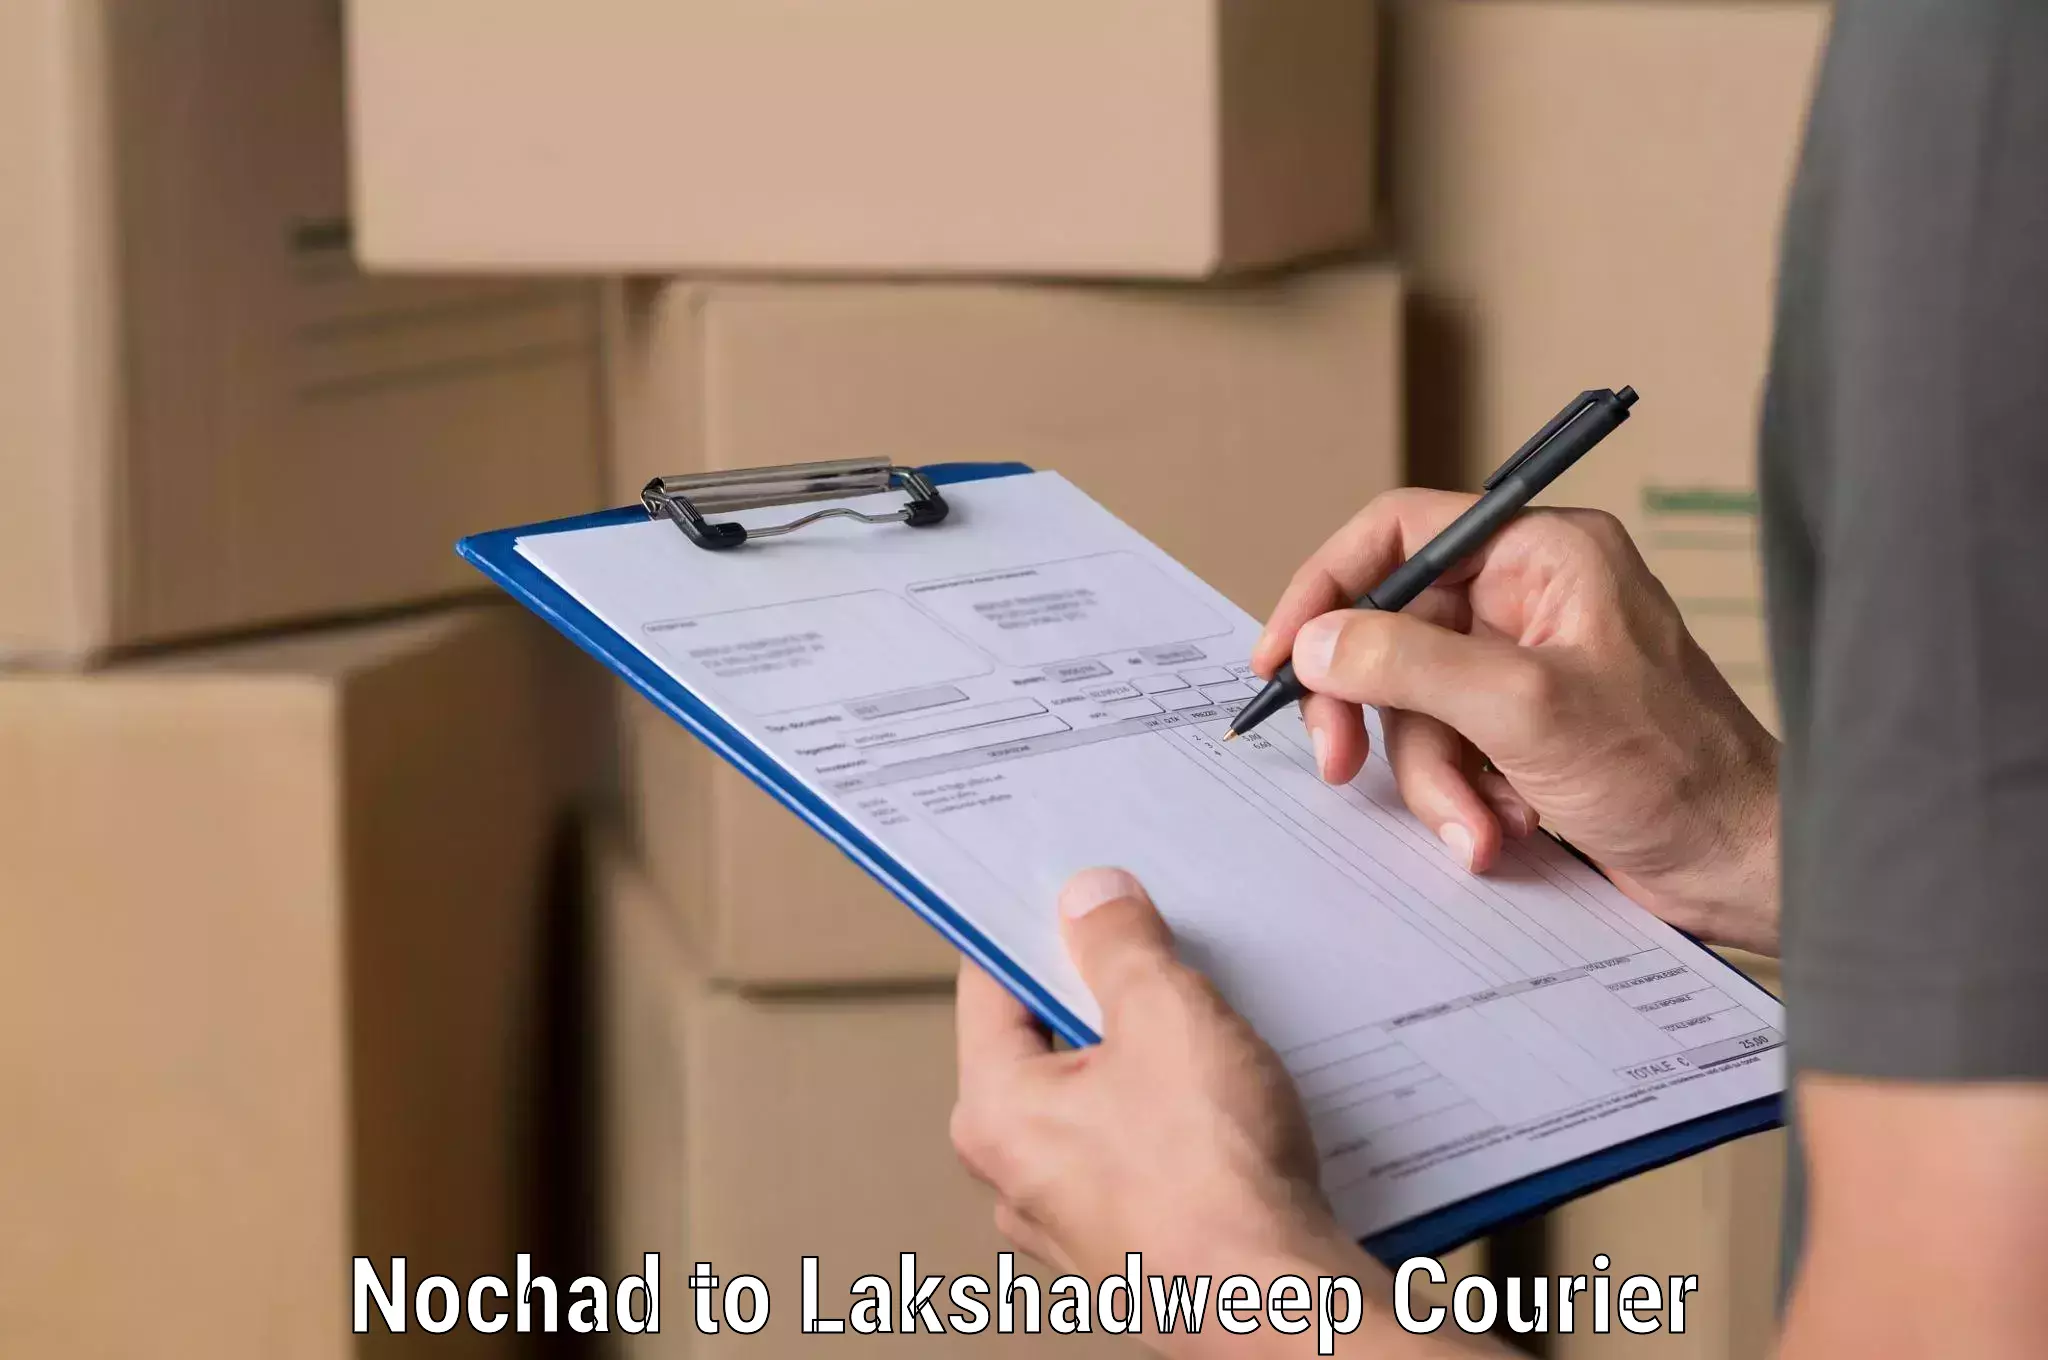 Package delivery network Nochad to Lakshadweep